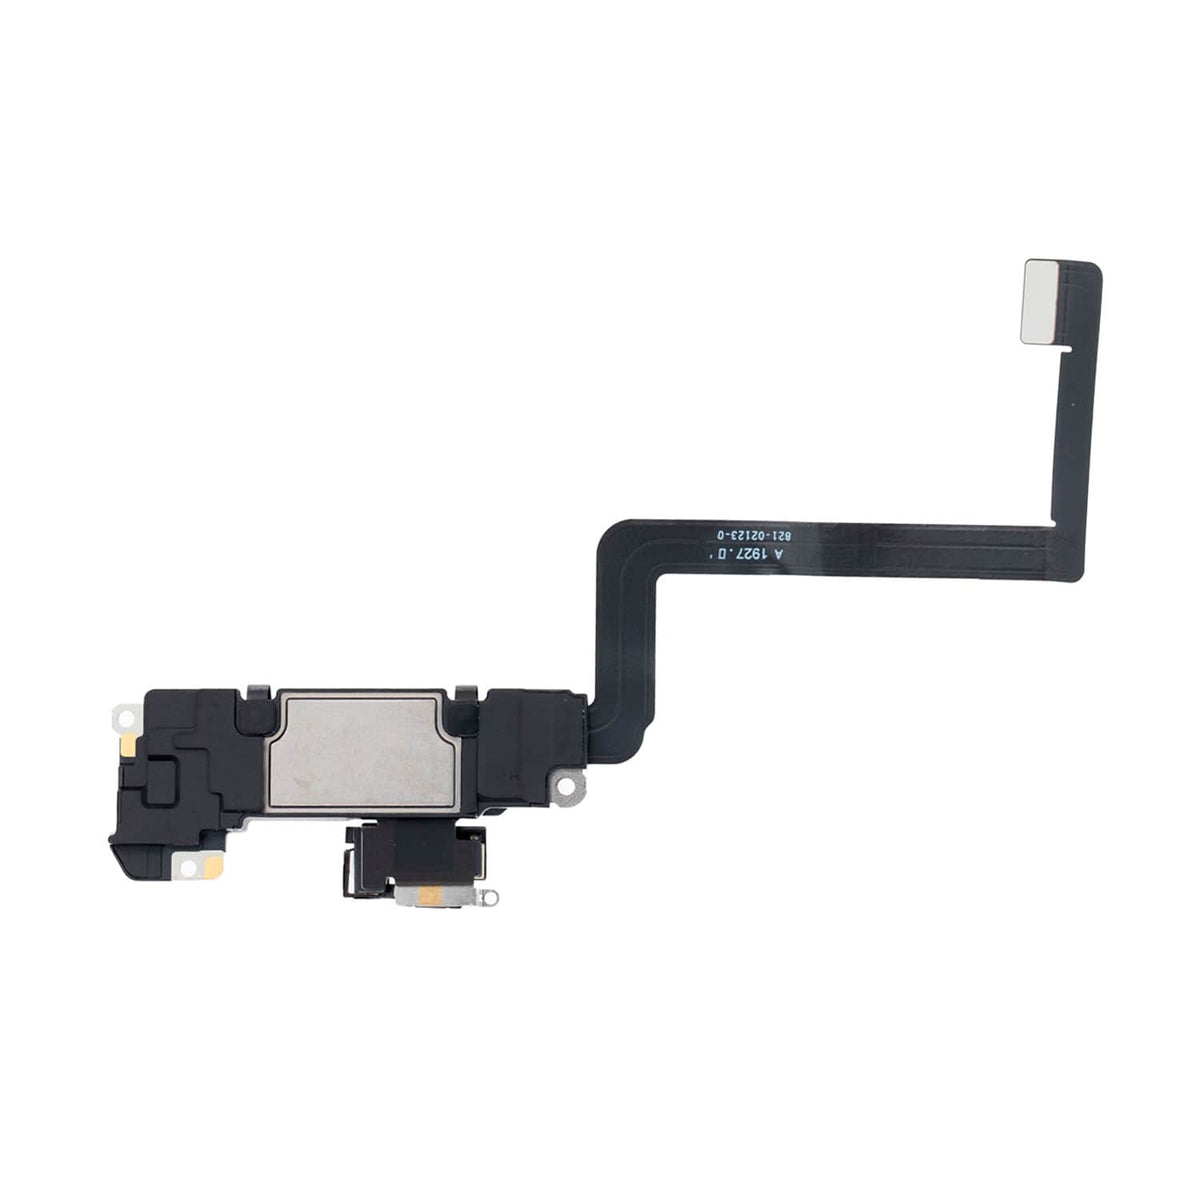 AMBIENT LIGHT SENSOR WITH EAR SPEAKER ASSEMBLY FOR IPHONE 11 PRO MAX